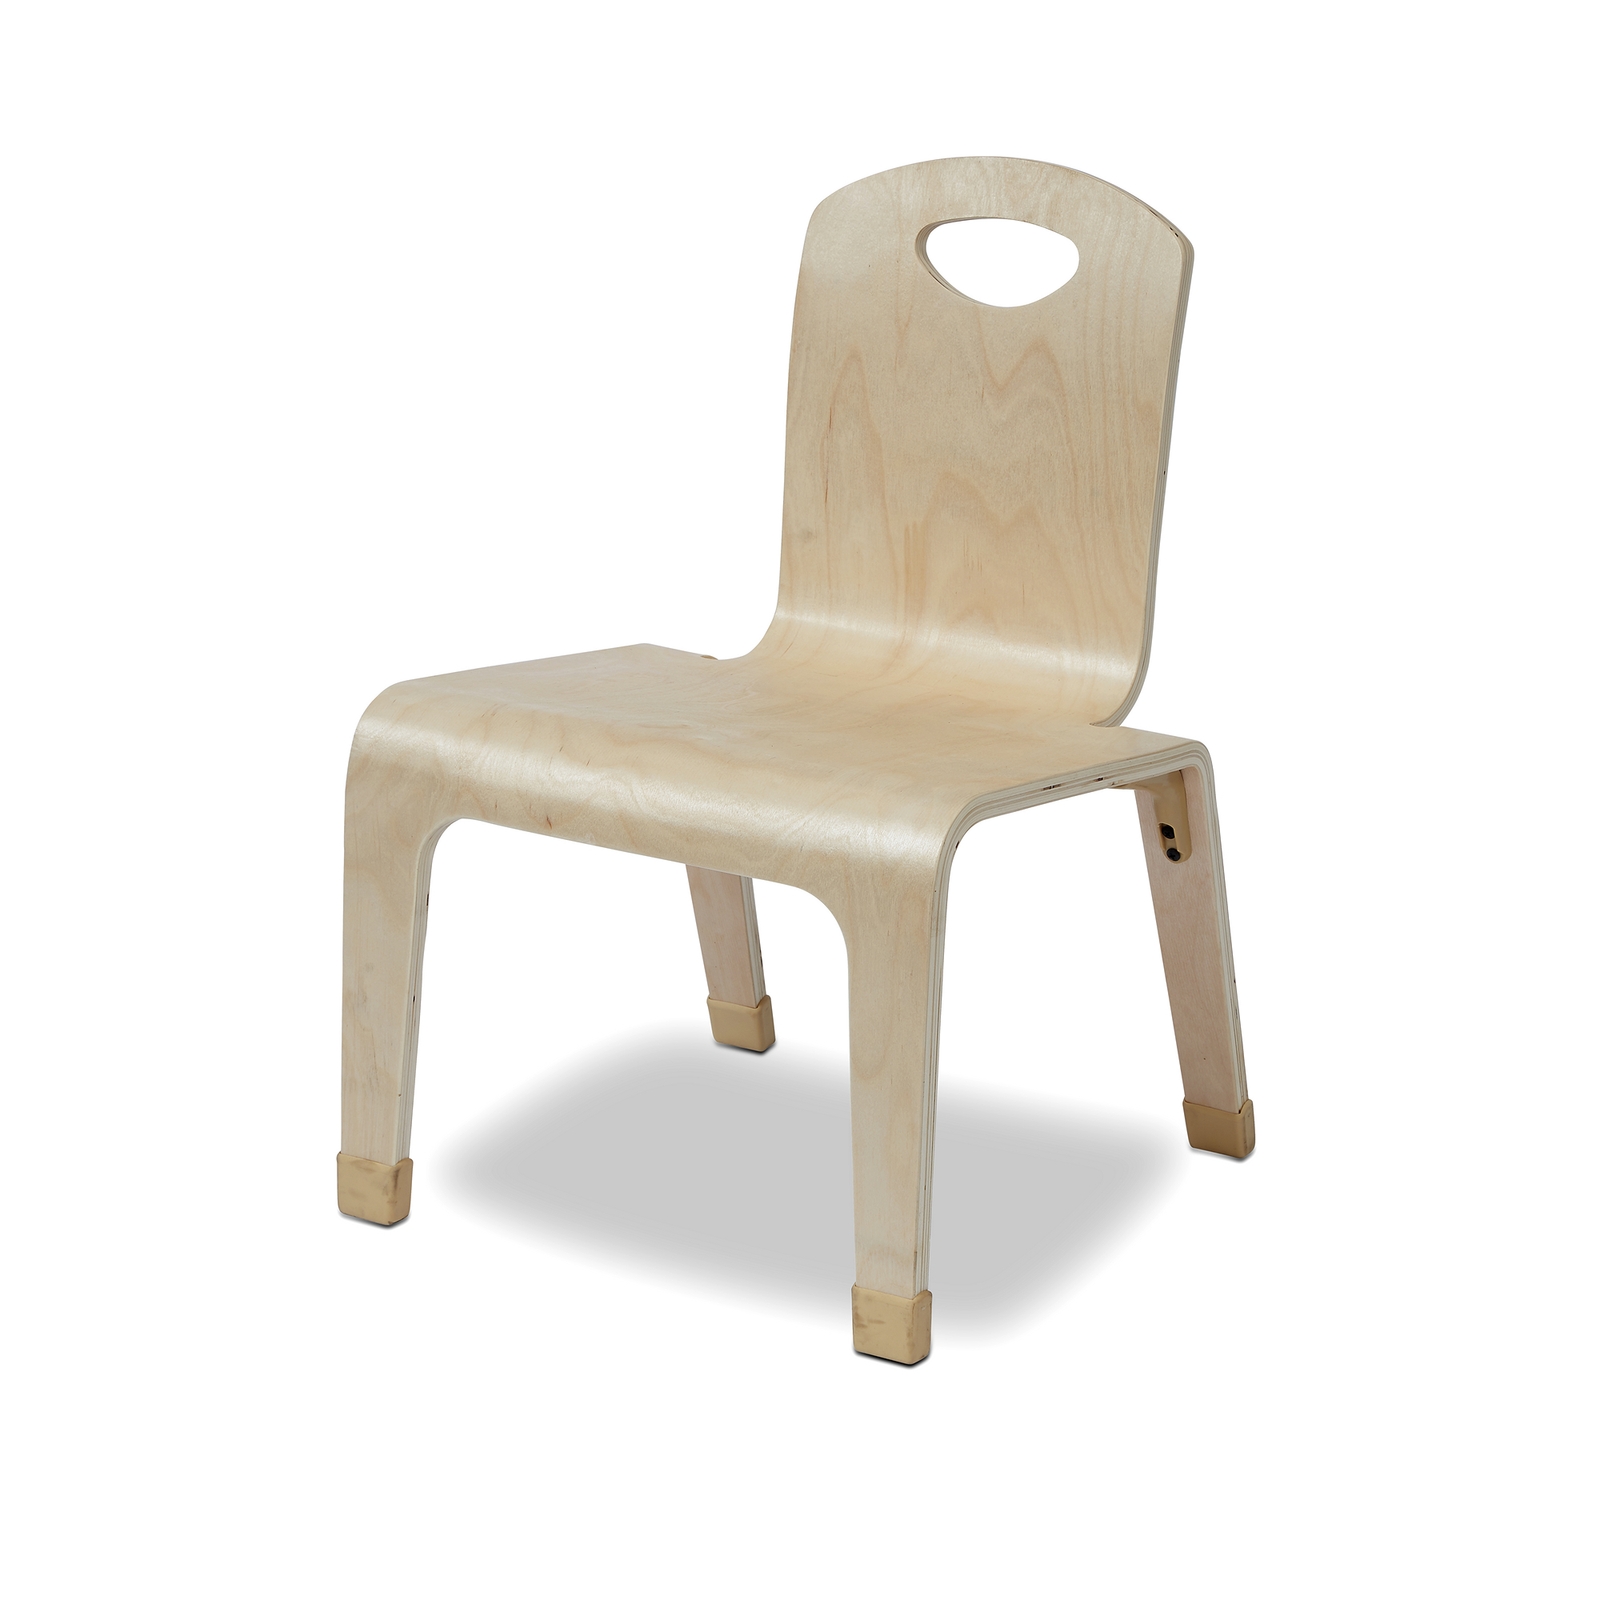 Playscapes One Piece Wooden Chair - Teacher - 310mm